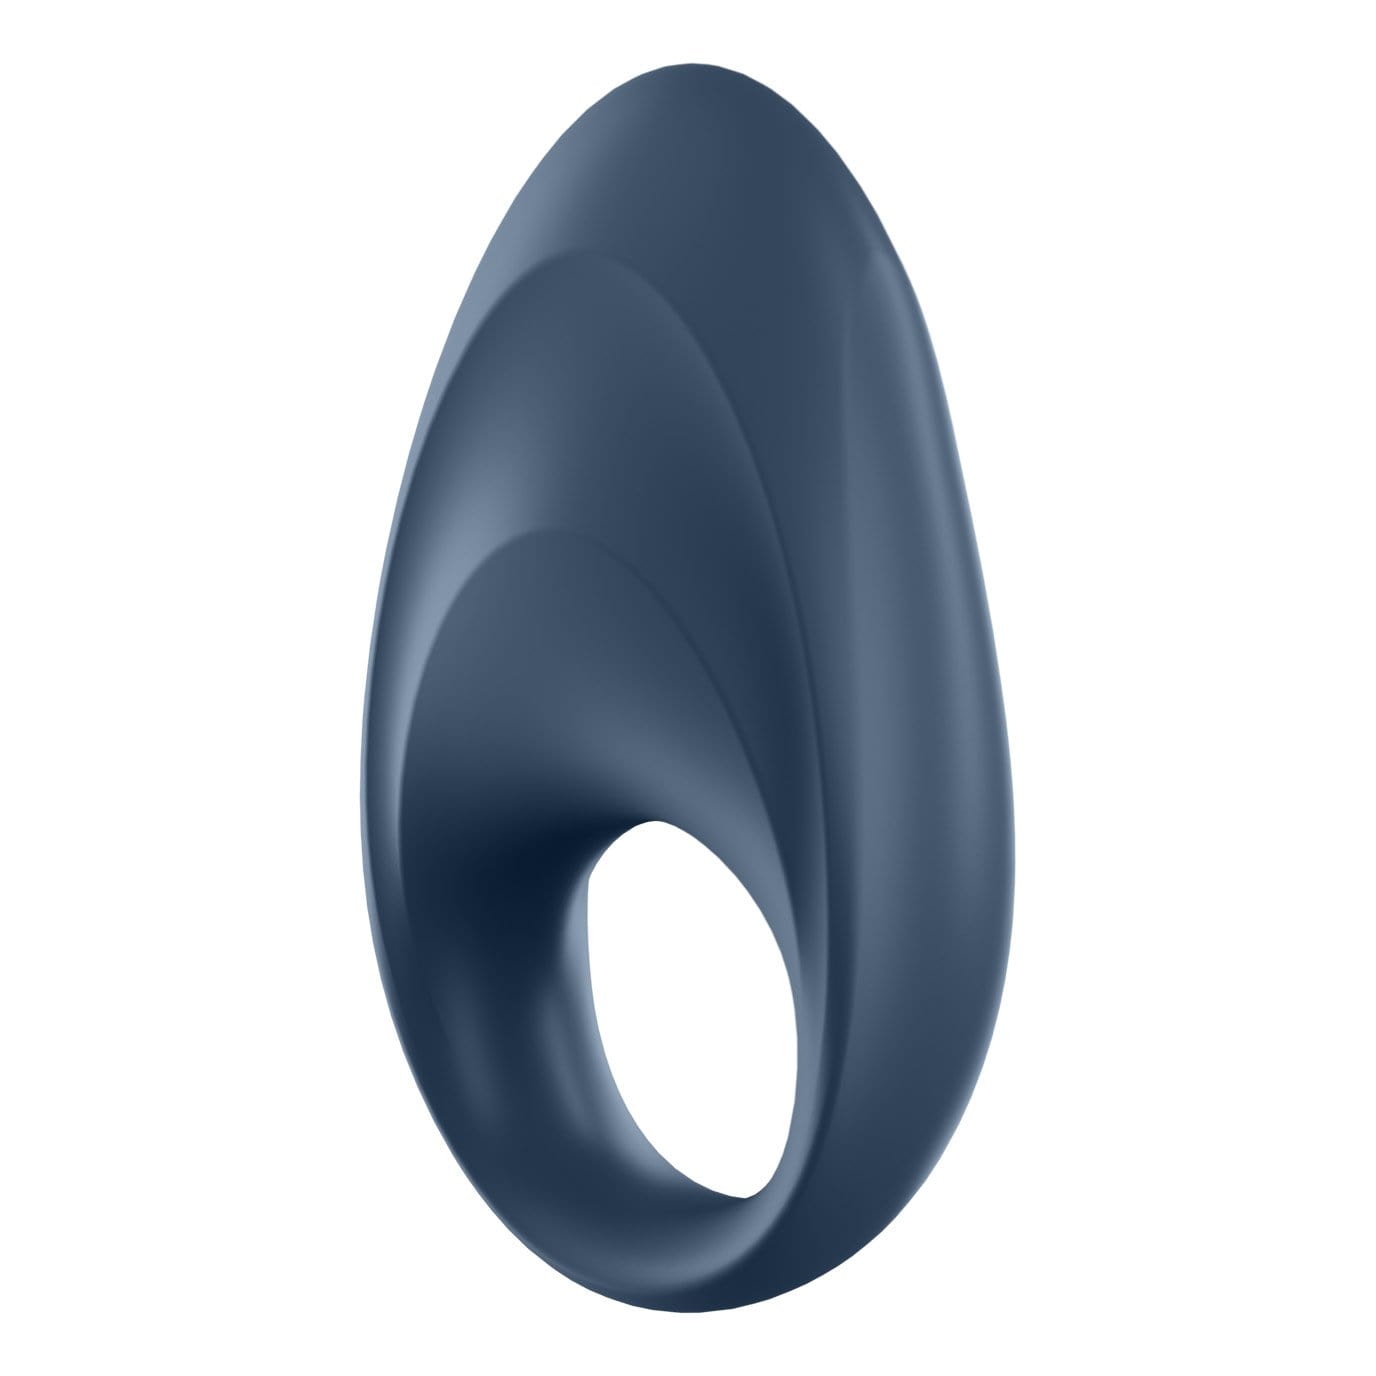 Satisfyer - Mighty One Ring App-Controlled Bluetooth Cock Ring (Blue) Remote Control Cock Ring (Vibration) Rechargeable 289884390 CherryAffairs